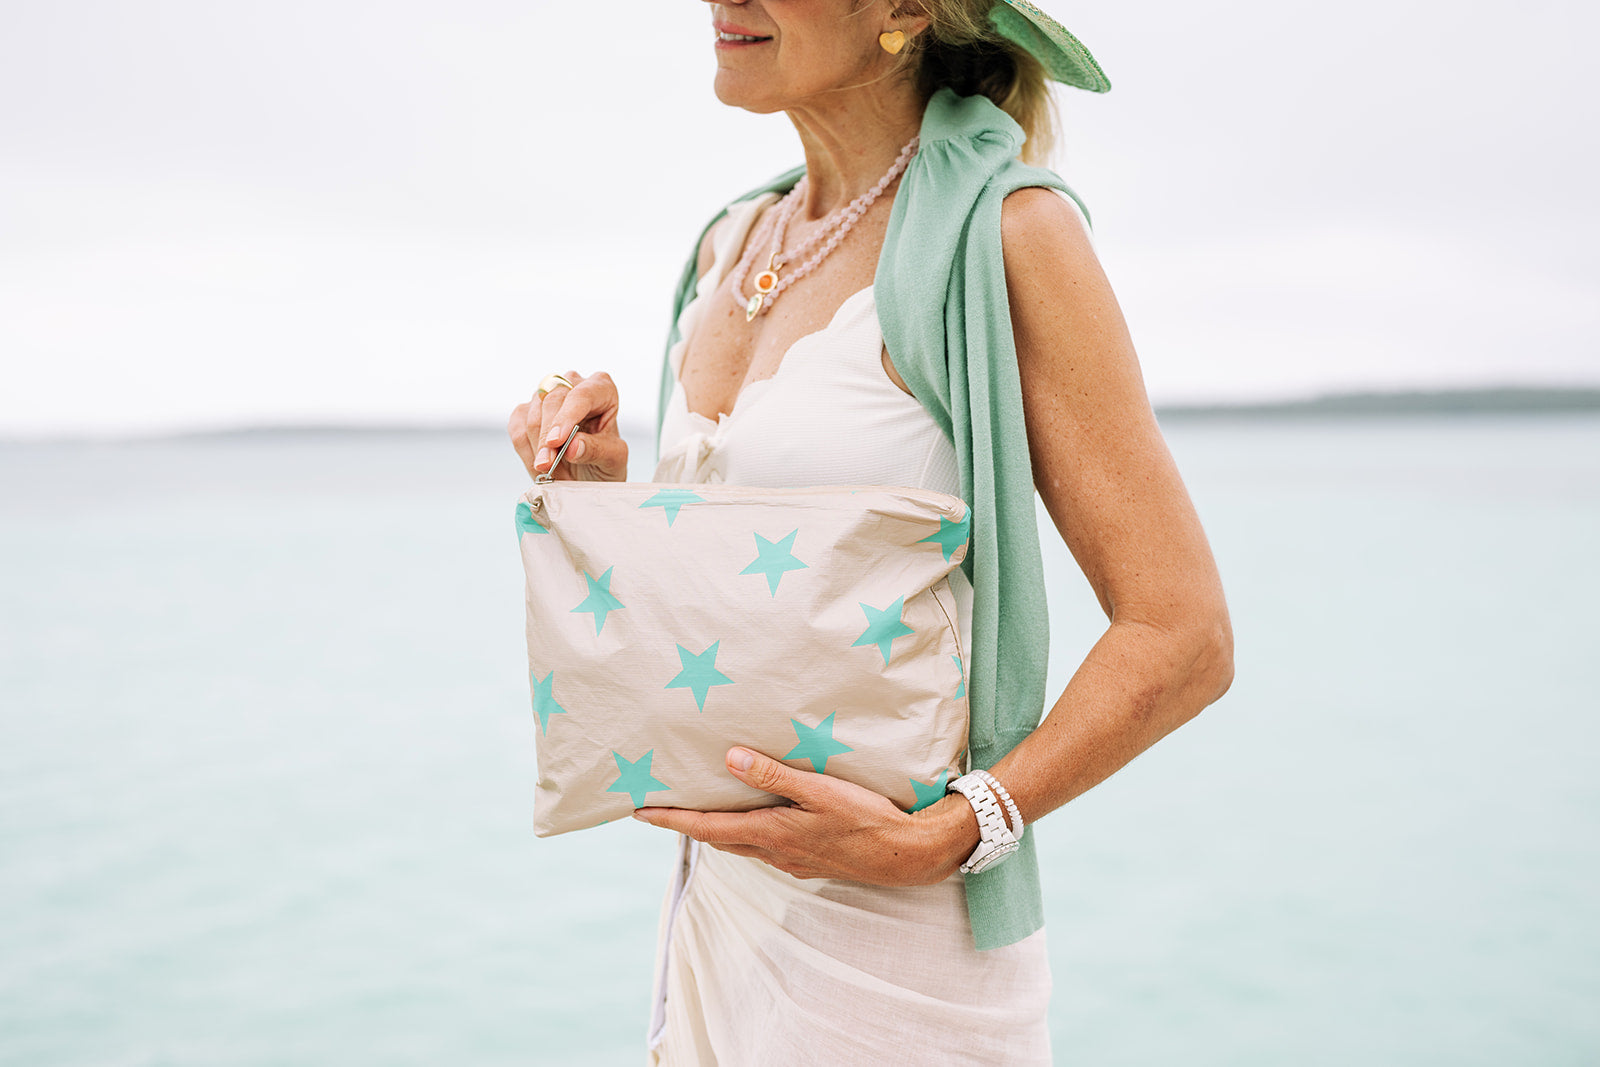 Woman standing by the ocean with a beige and green stars clutch bag